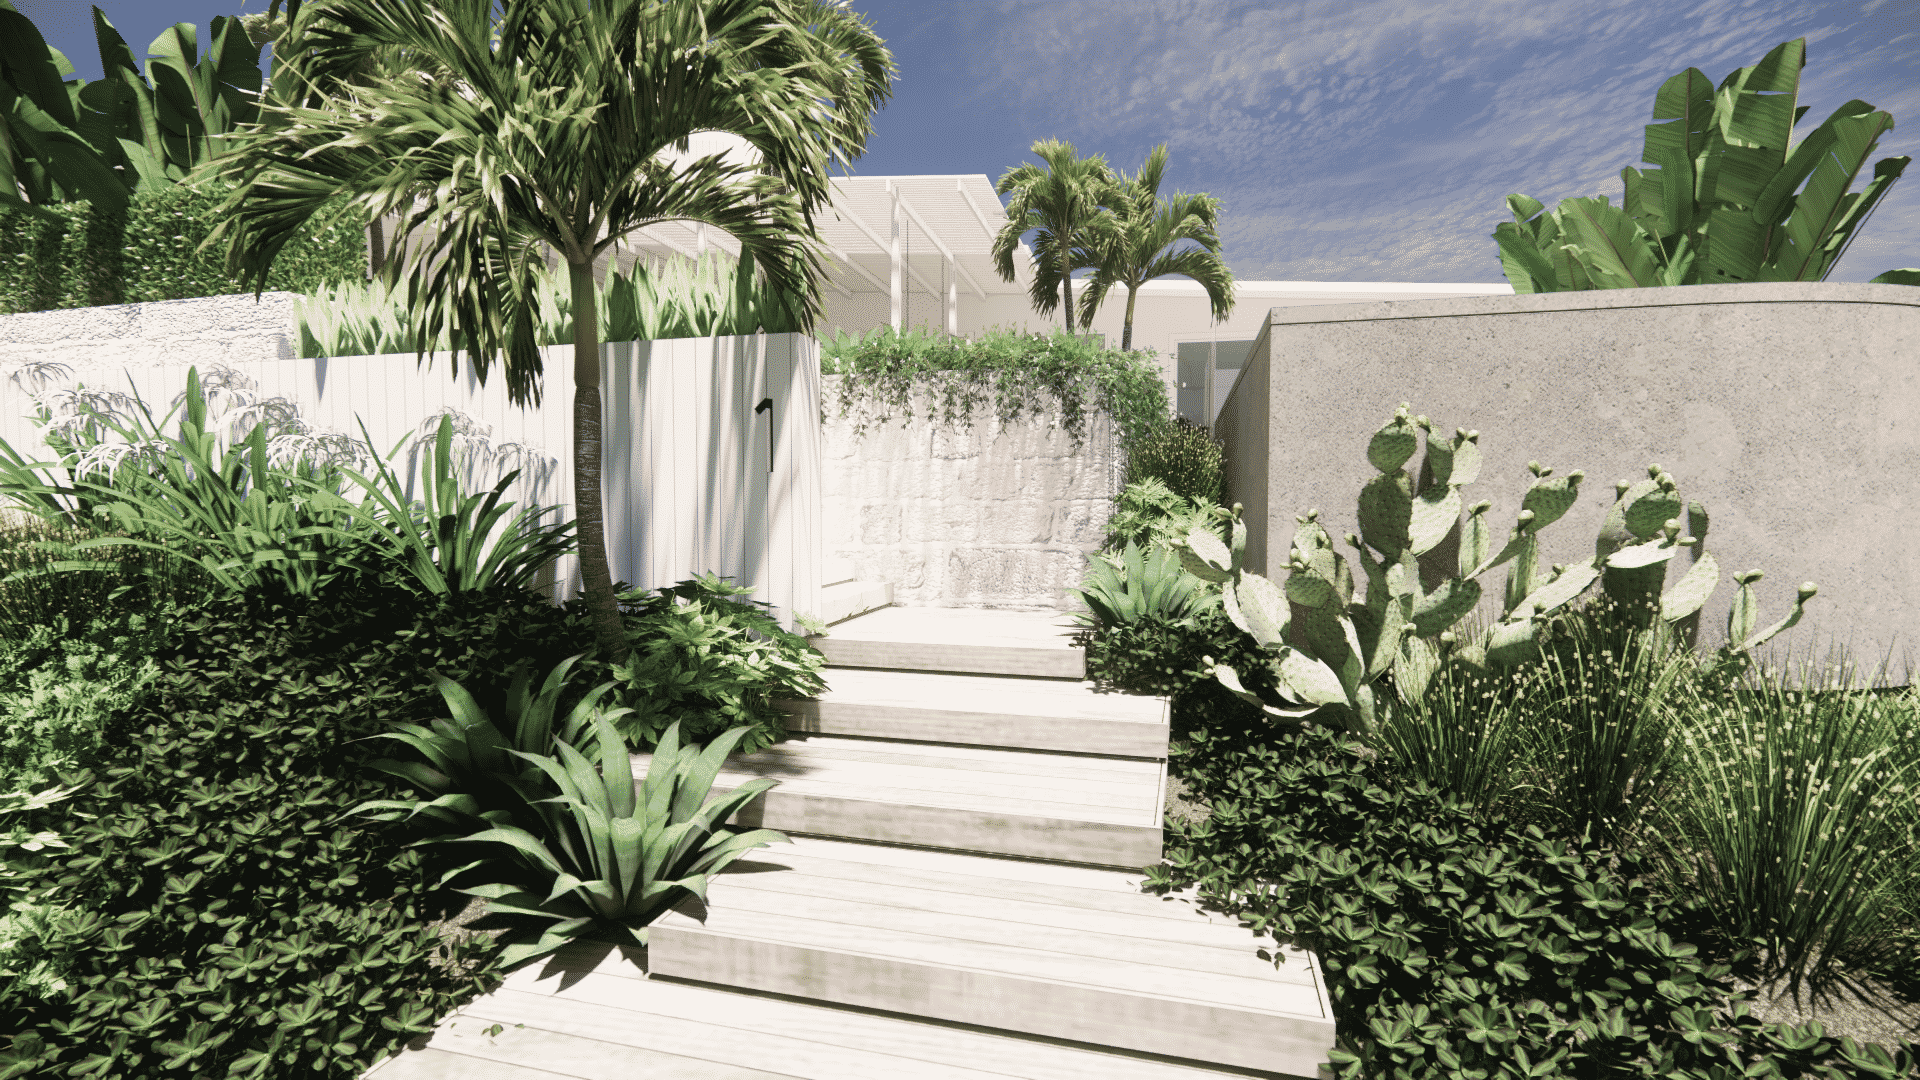 landscape design render of a front entryway with hardy cacti and palm trees.